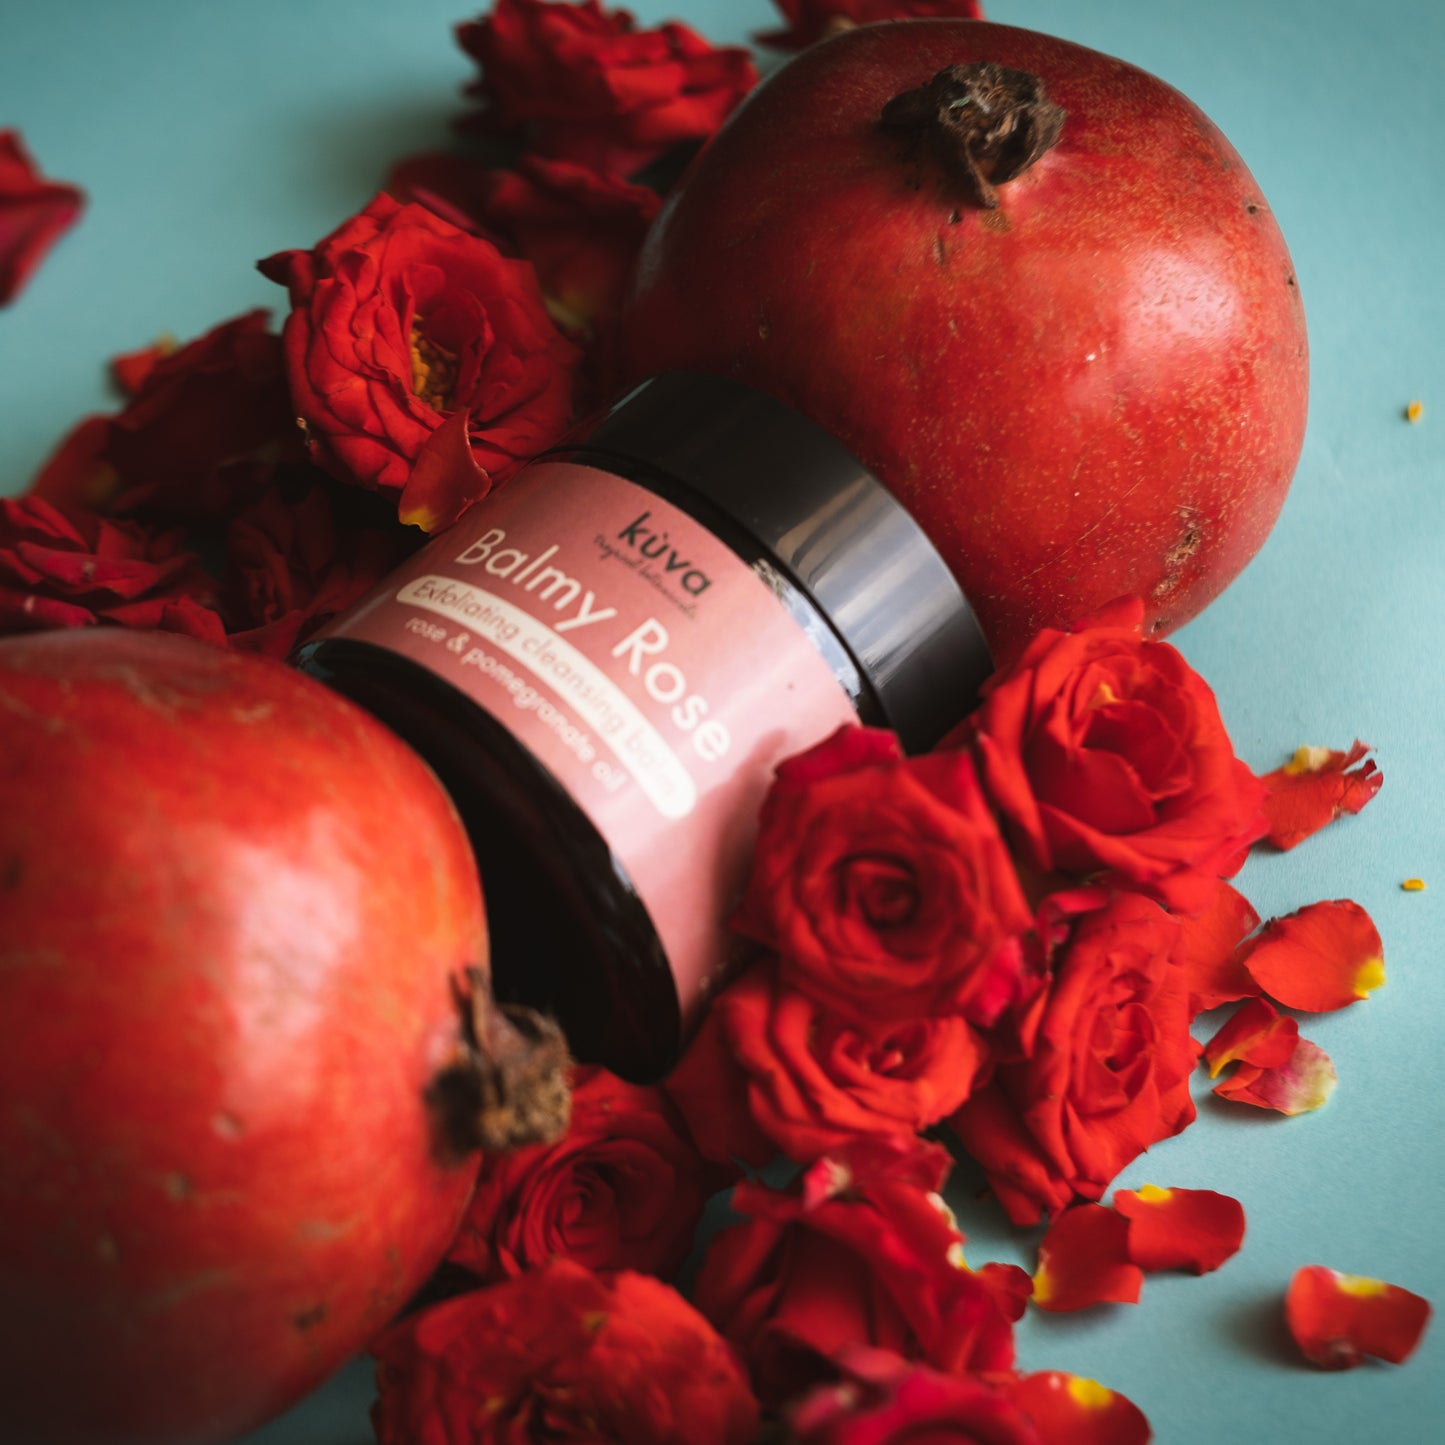 'Balmy Rose' - Exfoliating Cleansing Balm - Rose & Pomegranate oil - 50gms